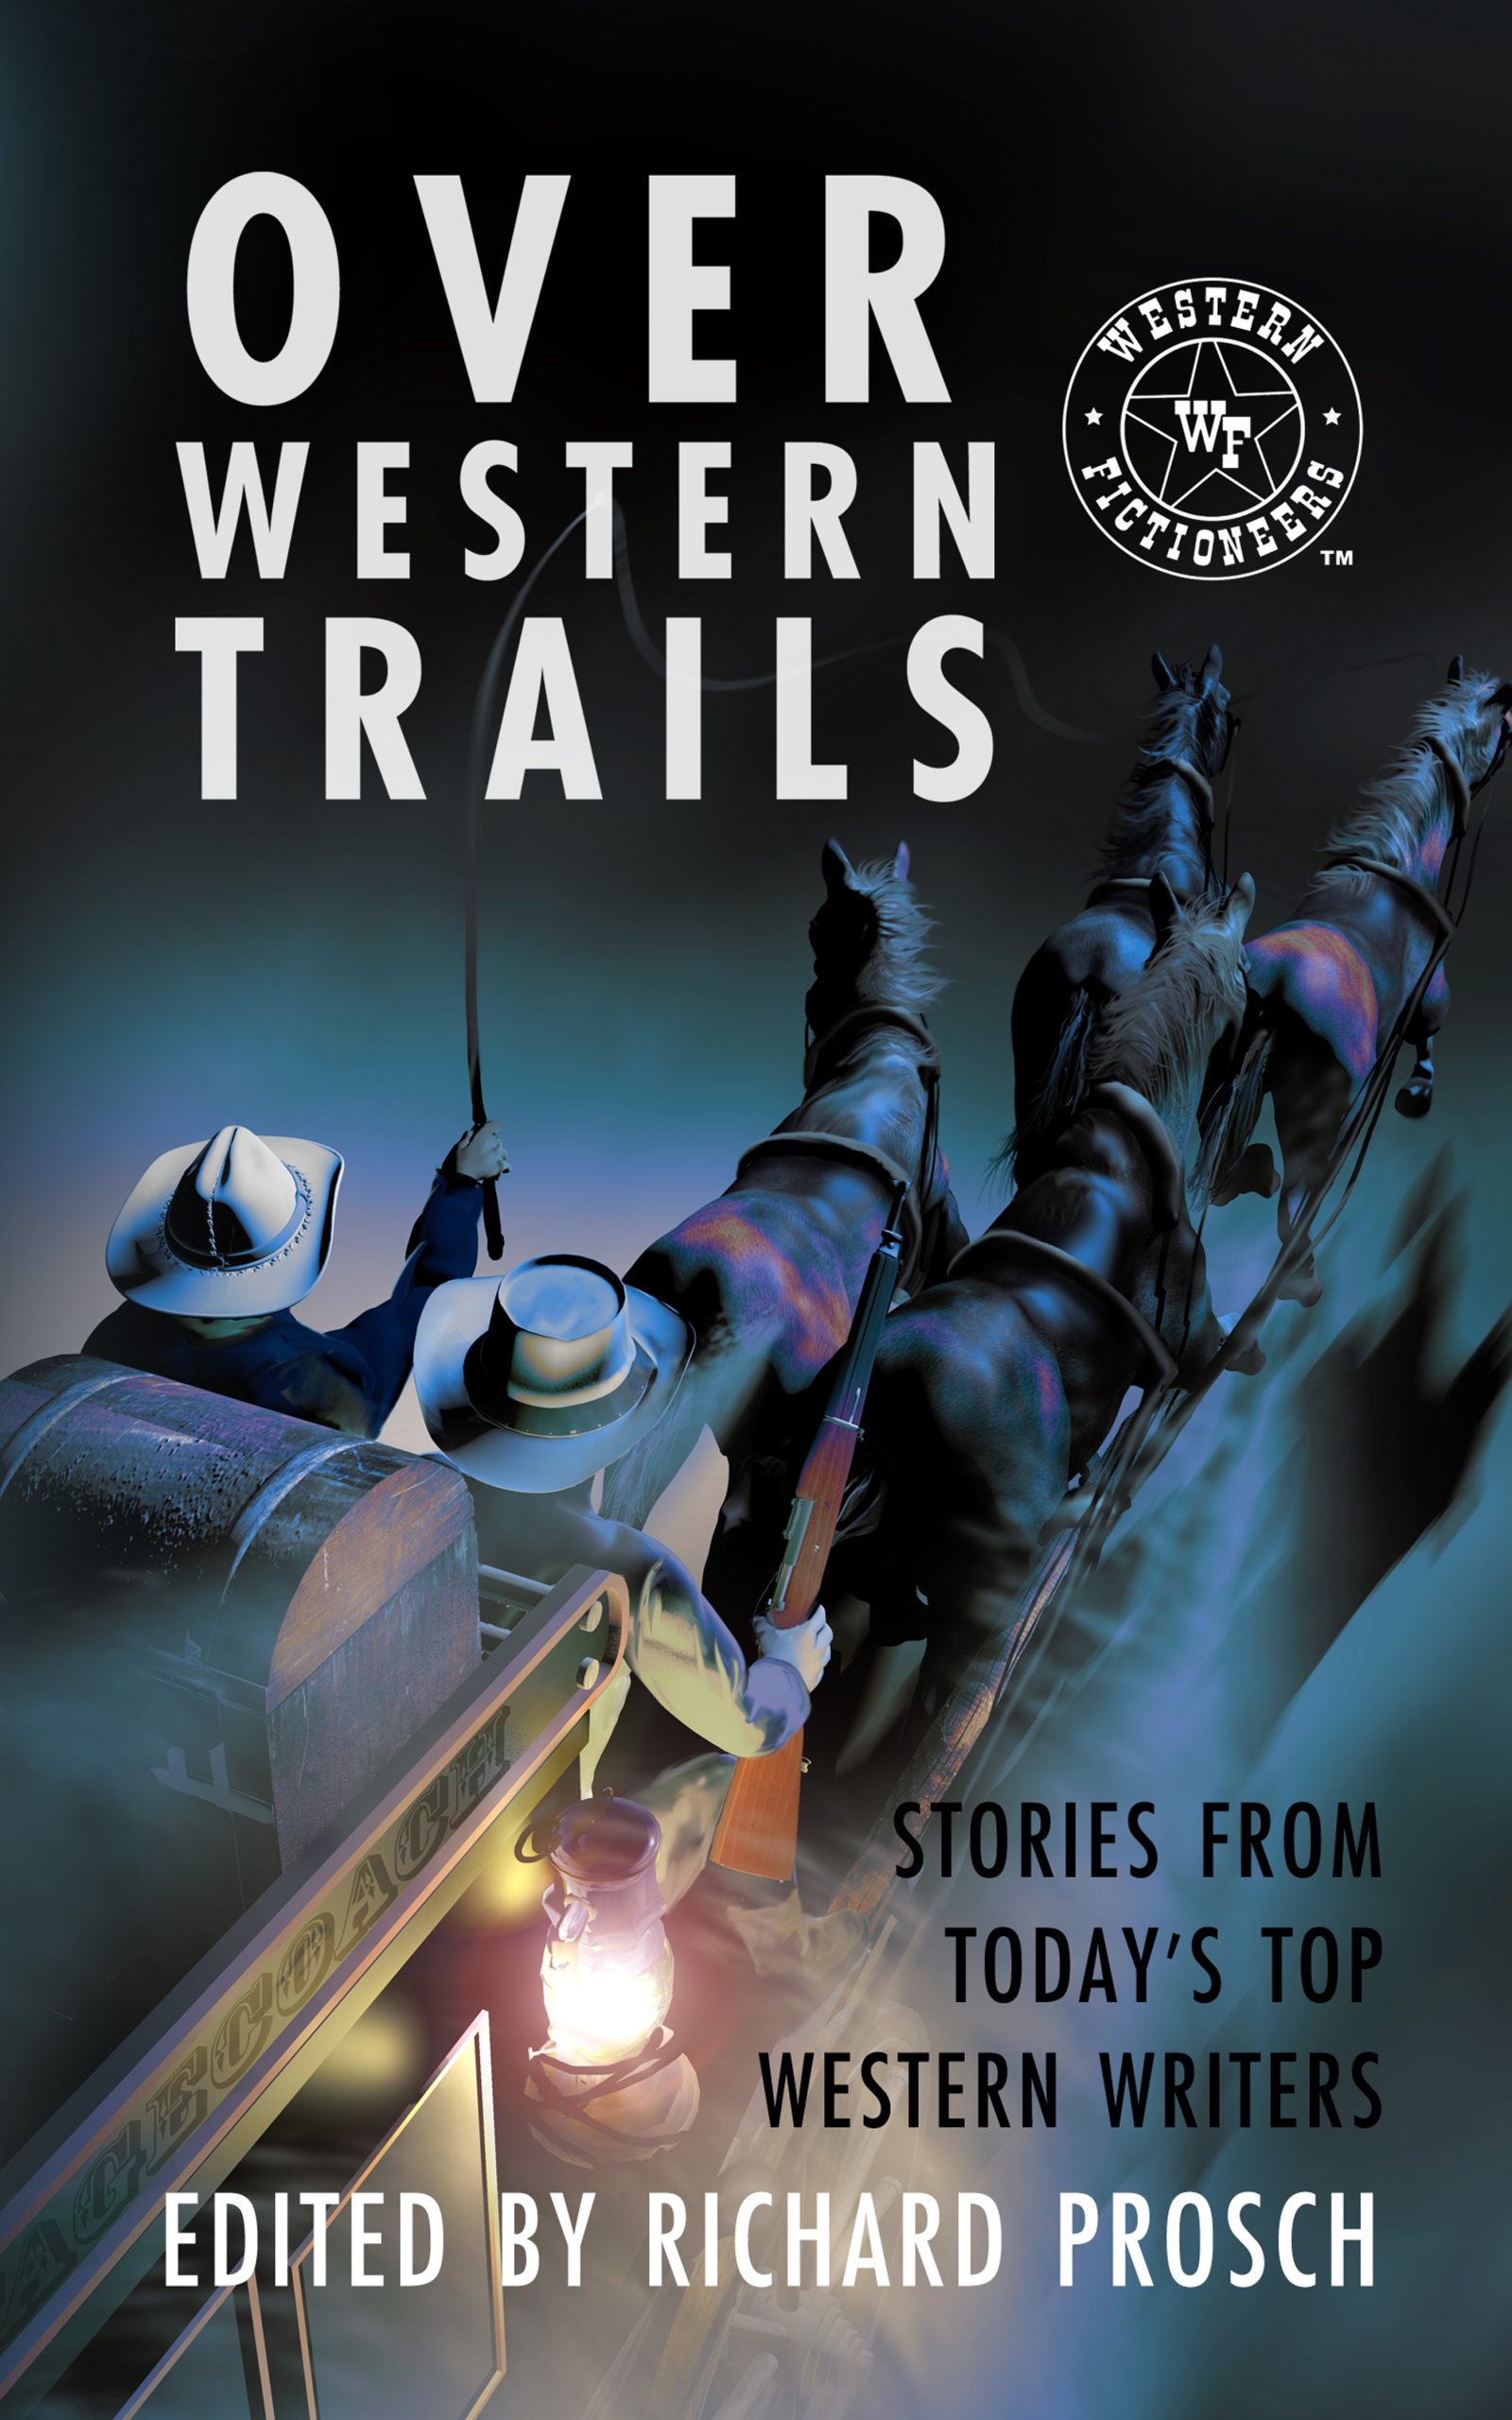 Over Western Trails